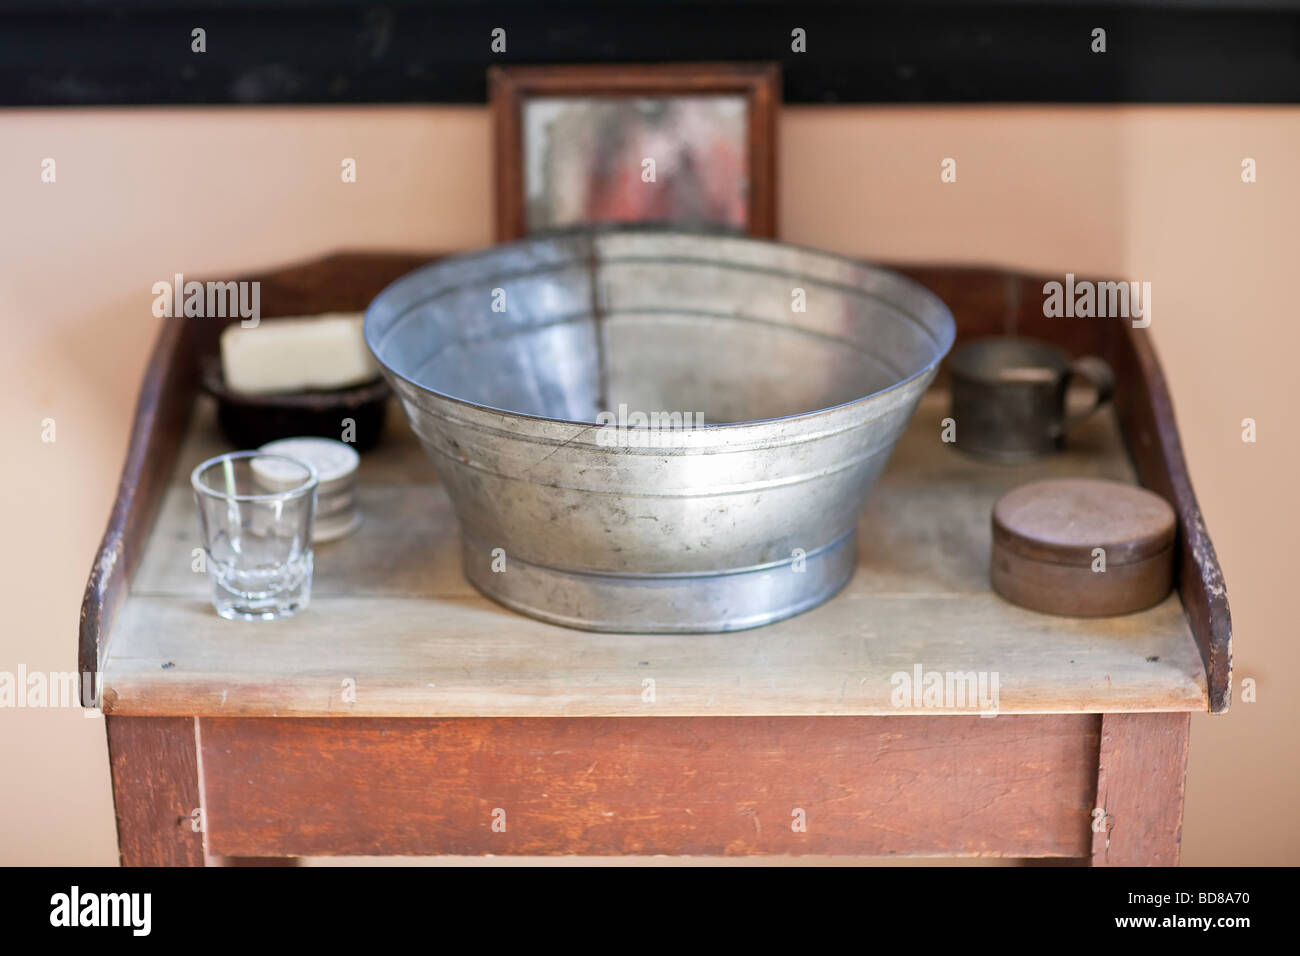 19th Century, Wash Table Basin. Lower Fort Garry National Historic Site, Manitoba, Canada. Stock Photo